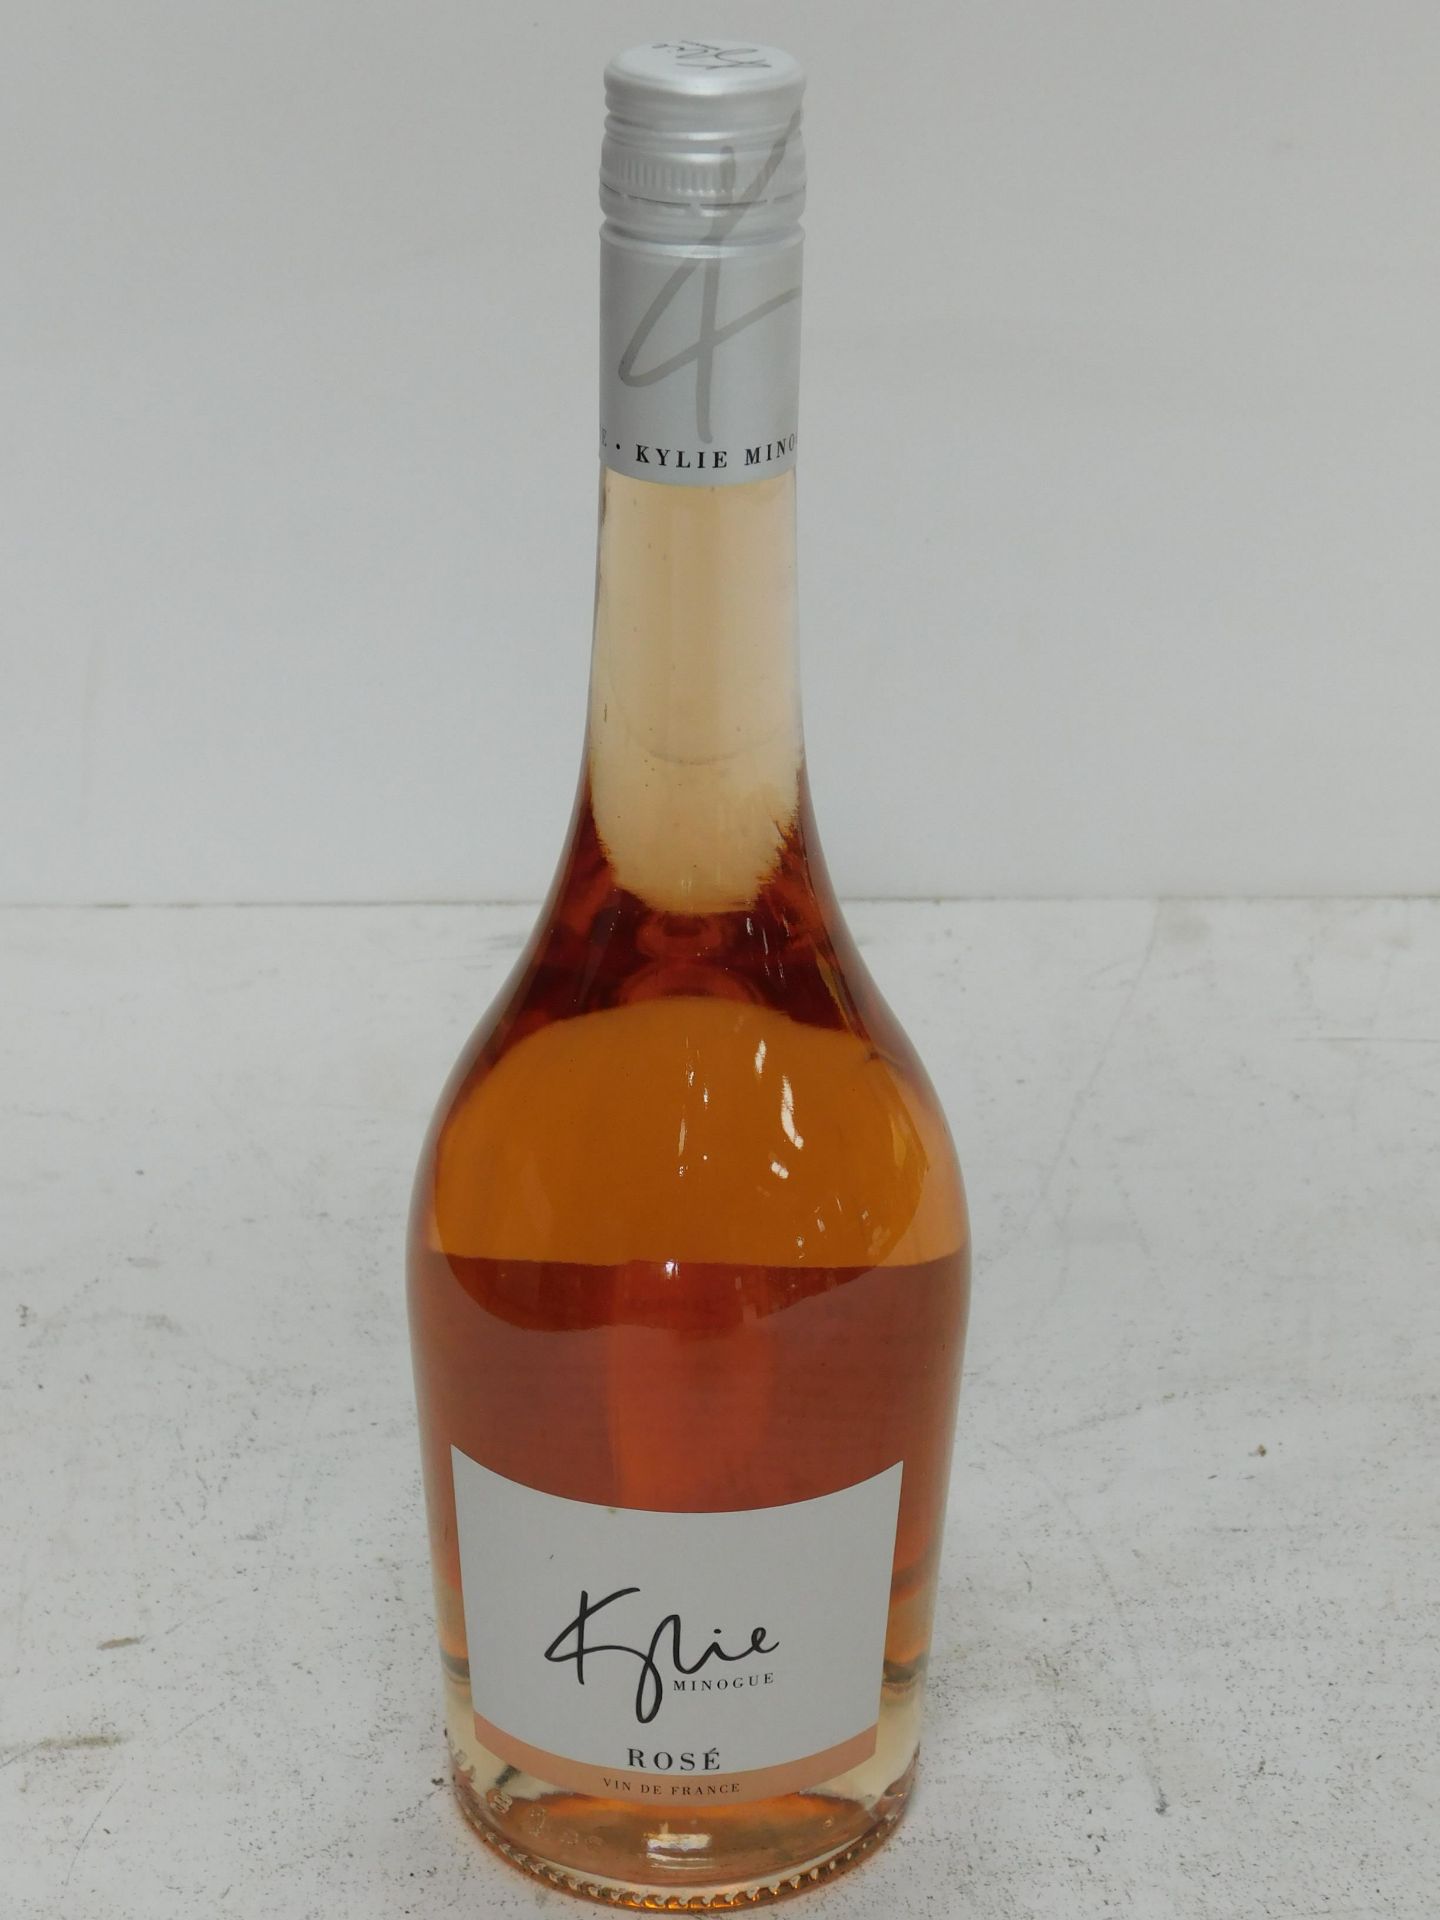 18 Kylie Minogue Vin de France Rose (Location: Brentwood. Please Refer to General Notes)